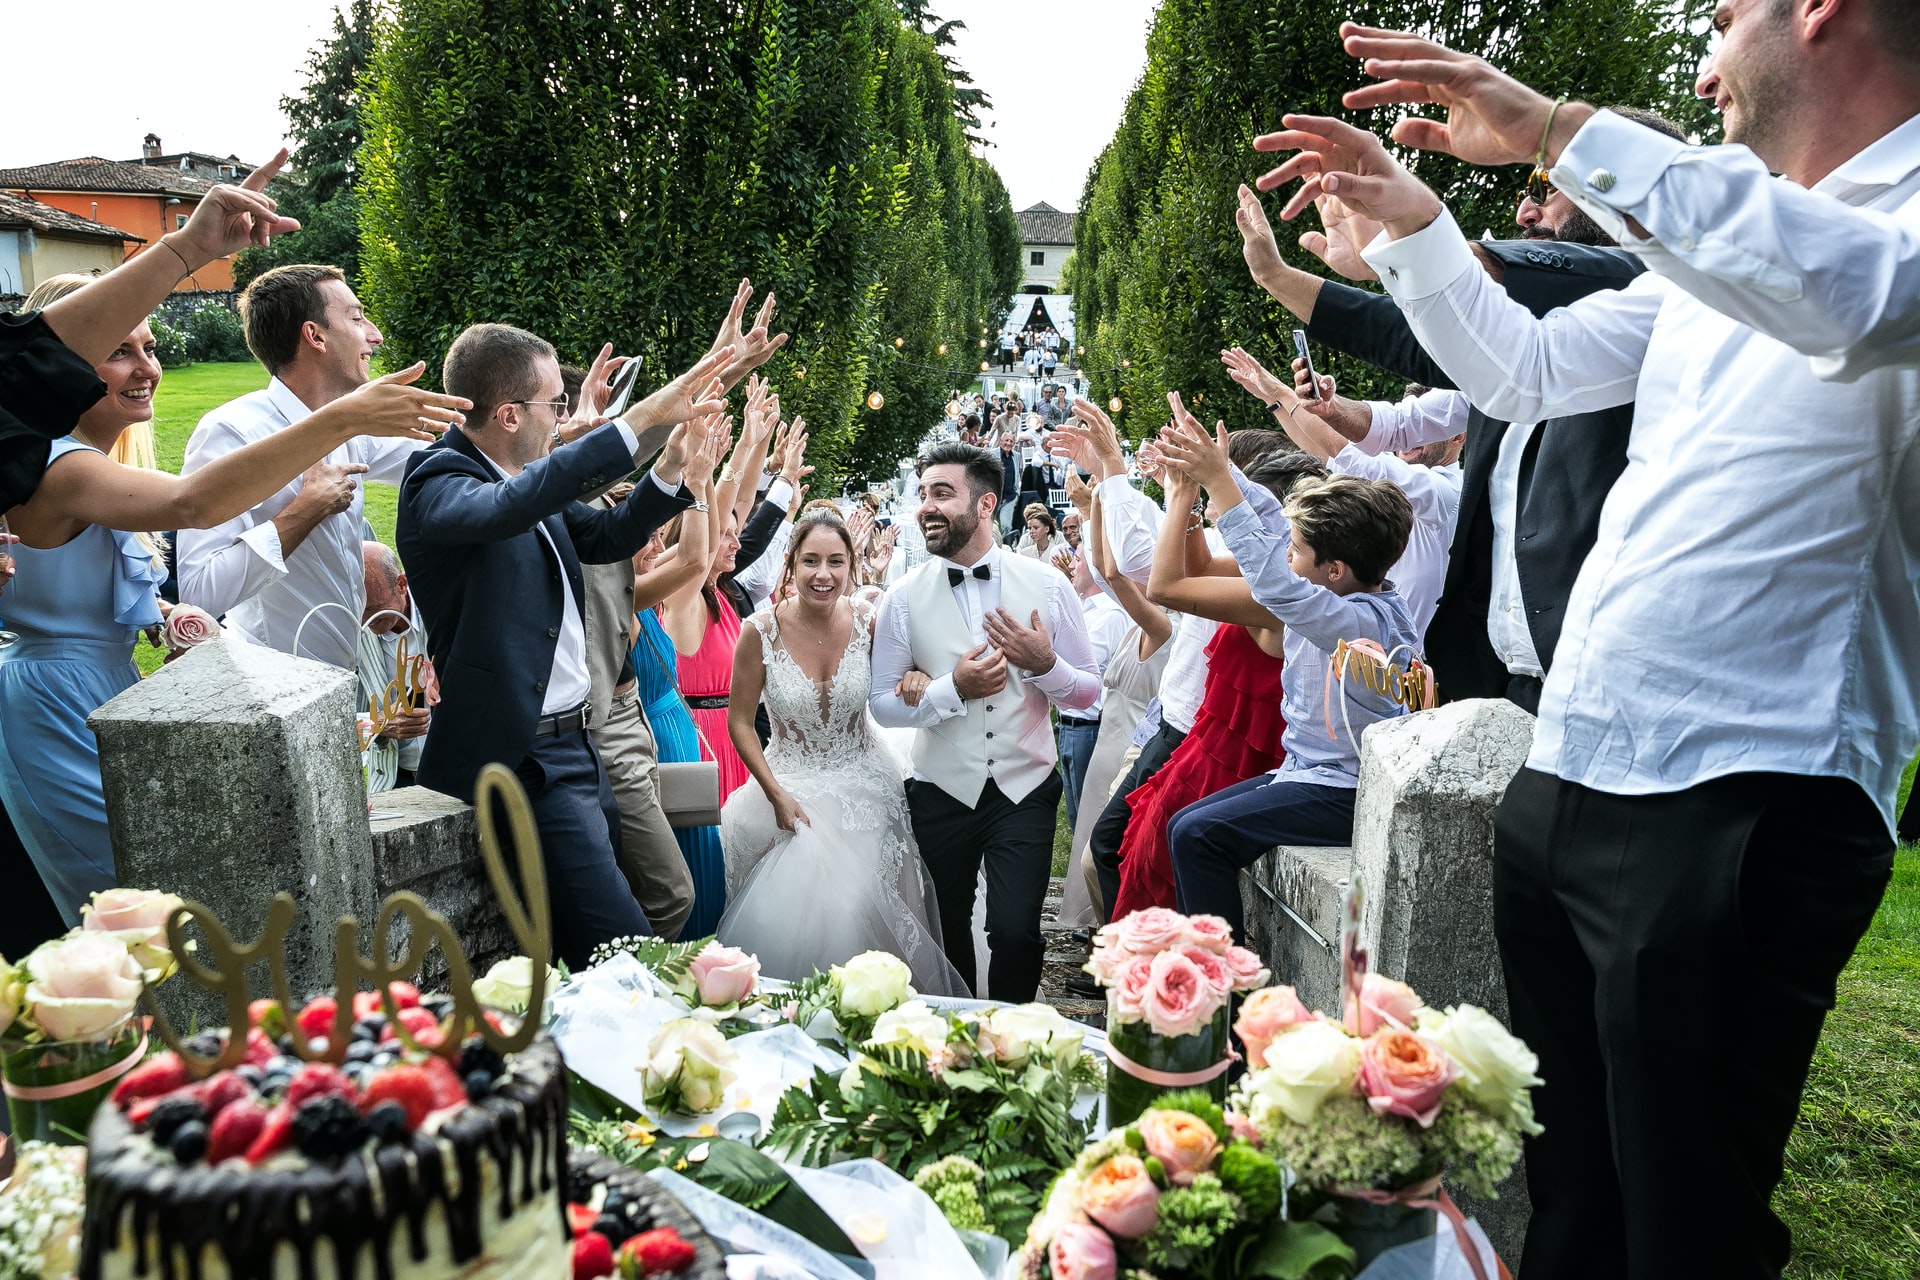 How to Throw an Awesome Wedding Party